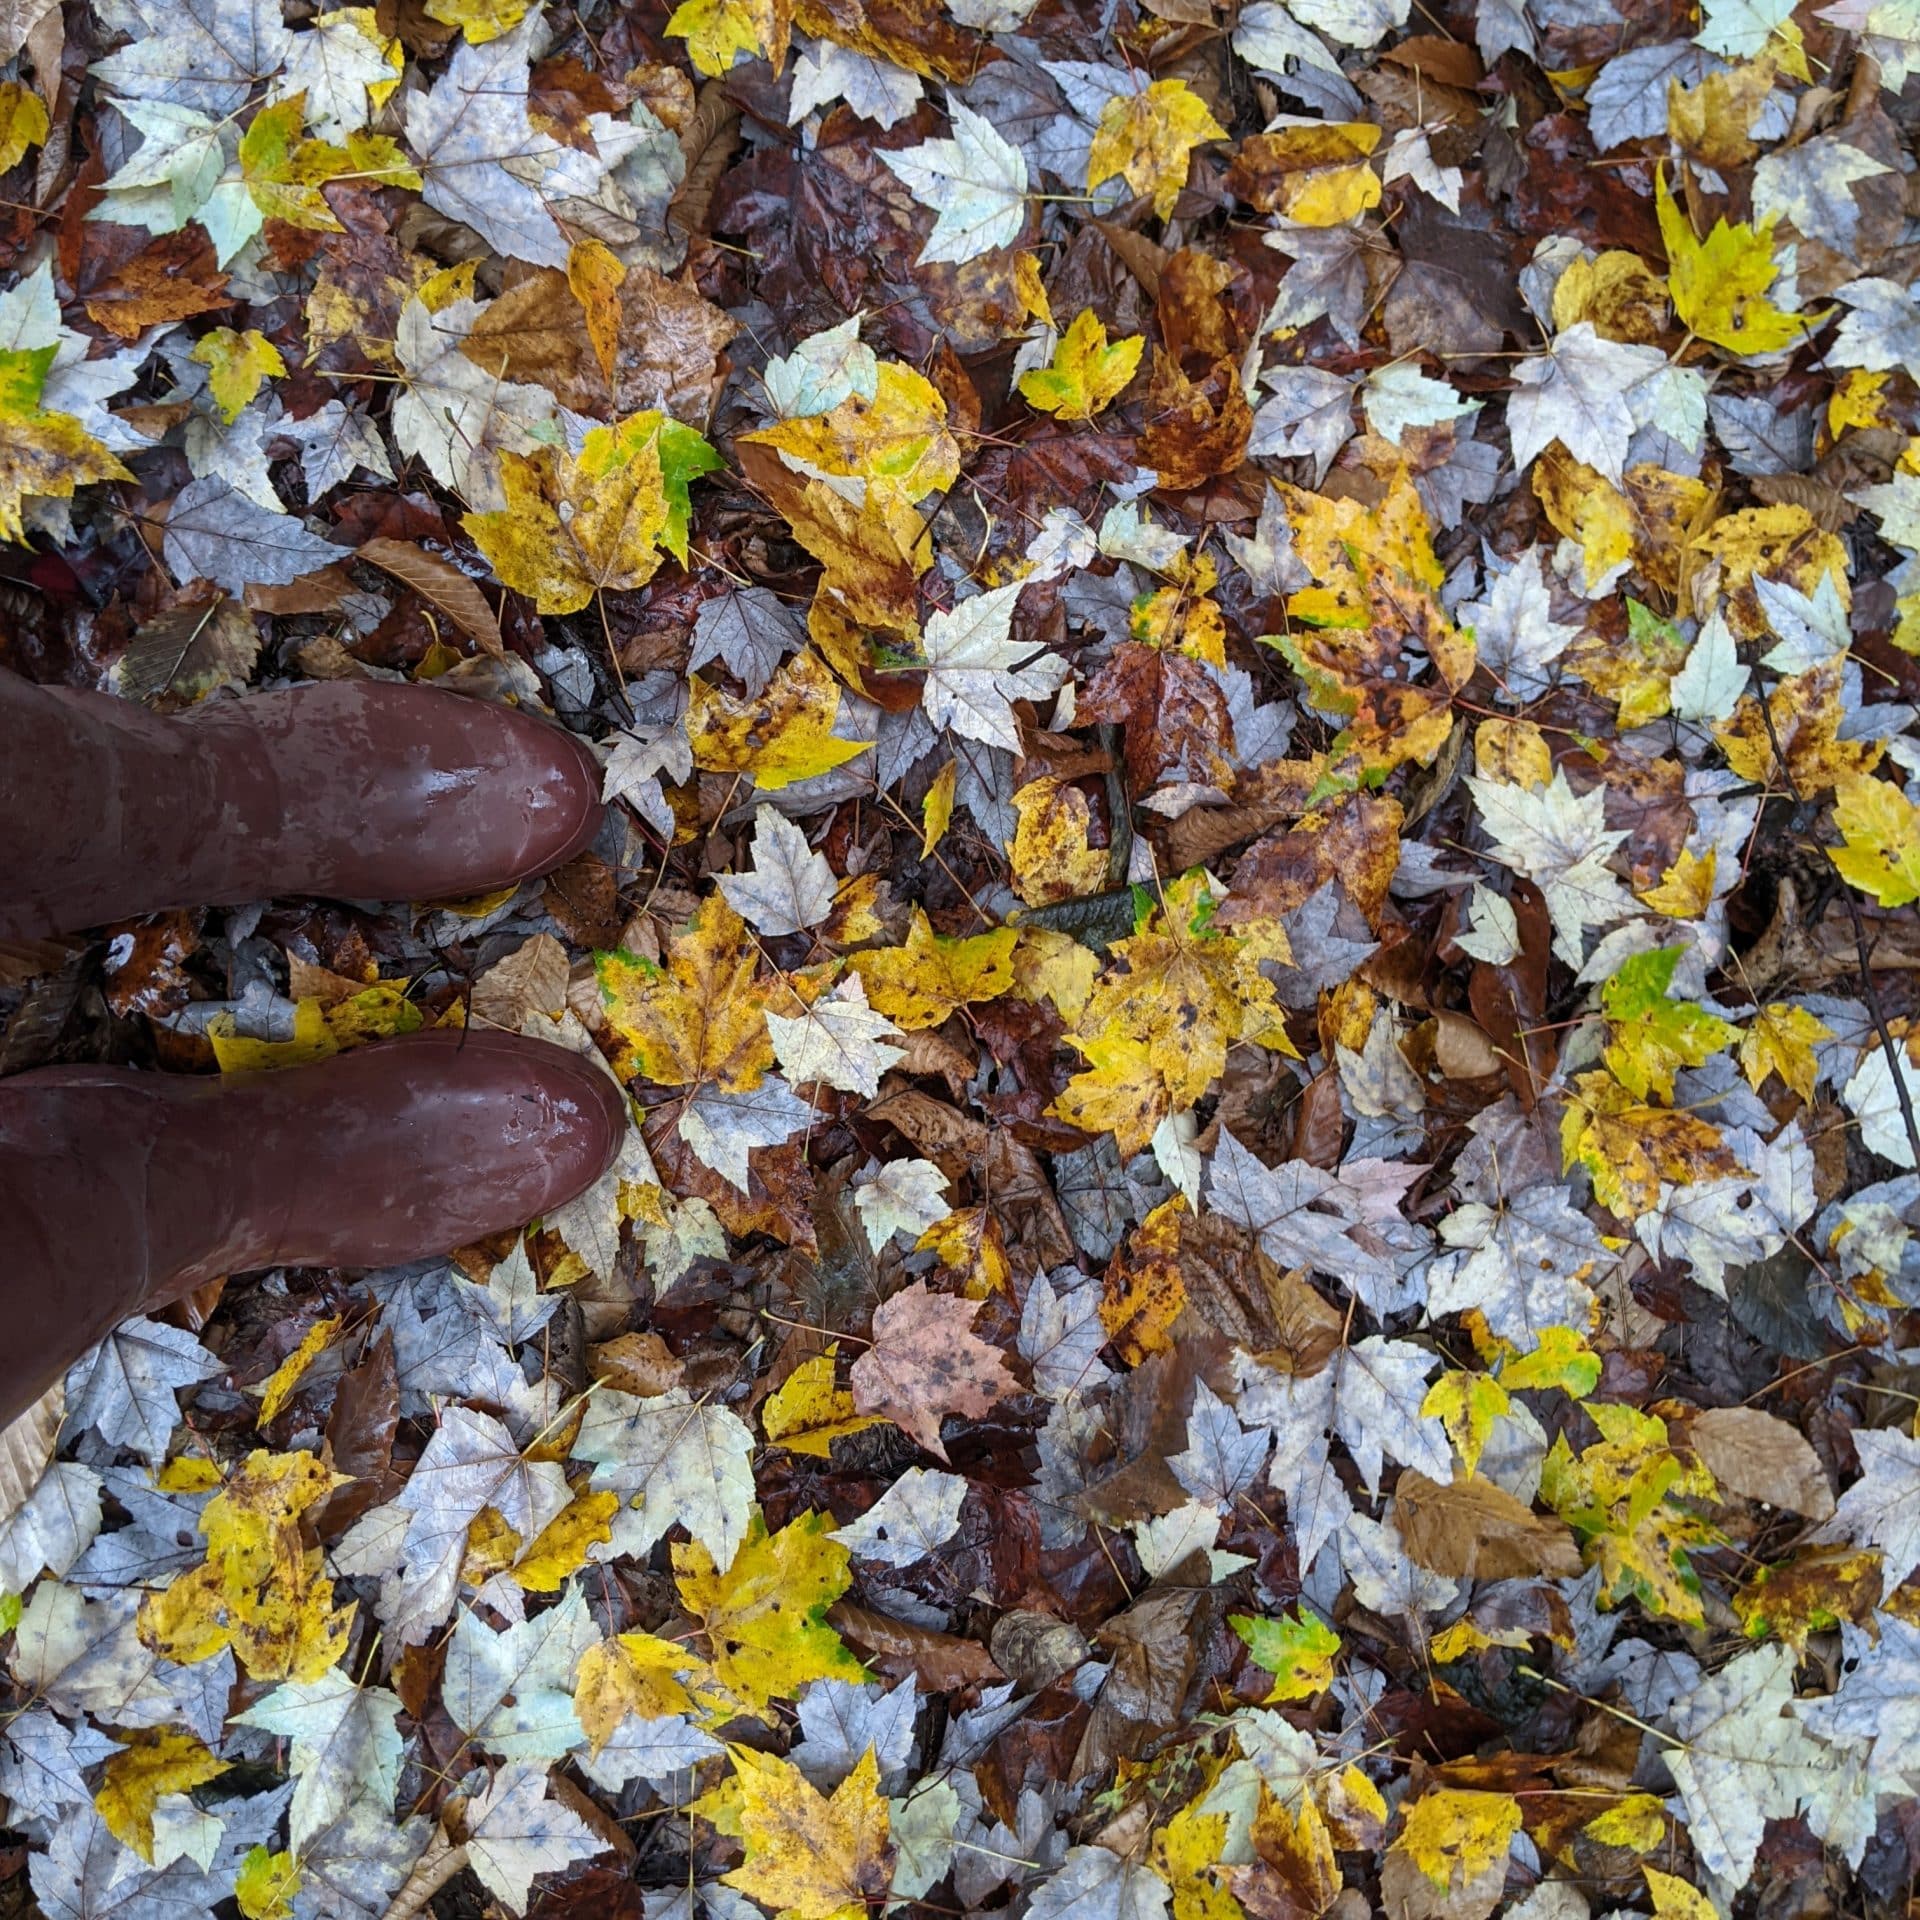 Wet leaves and rain boots